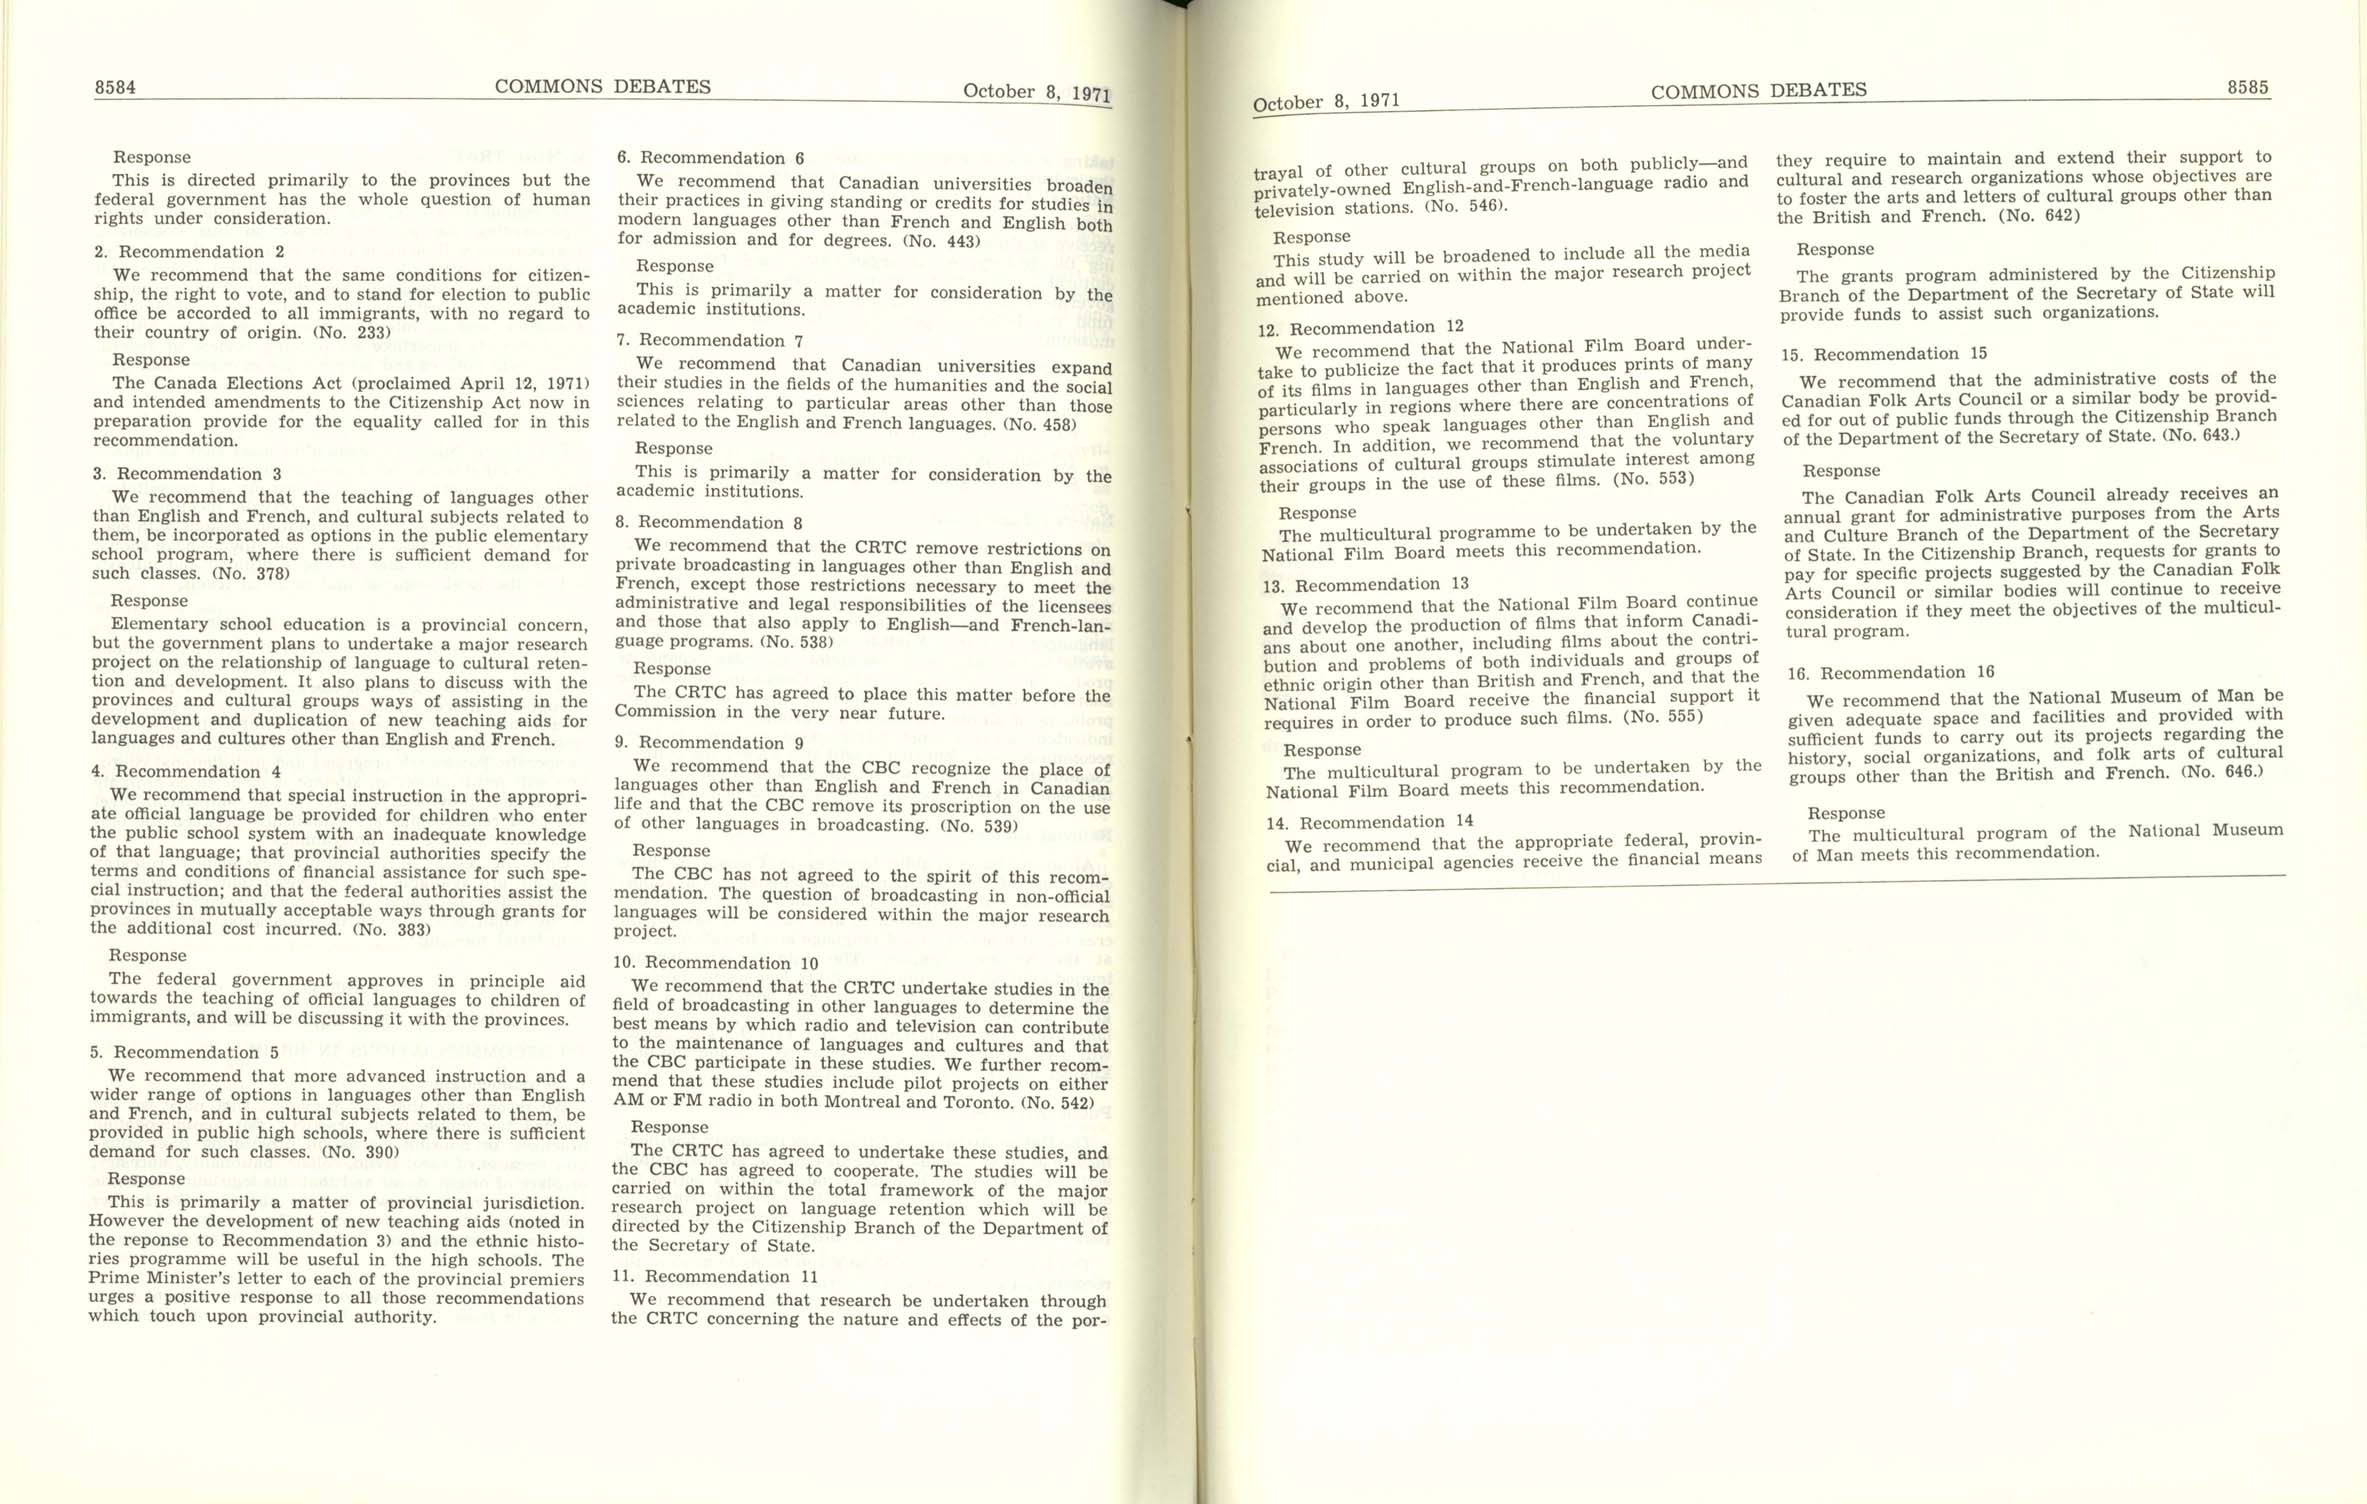 Page 8584, 8585 Canadian Multiculturalism Policy, 1971